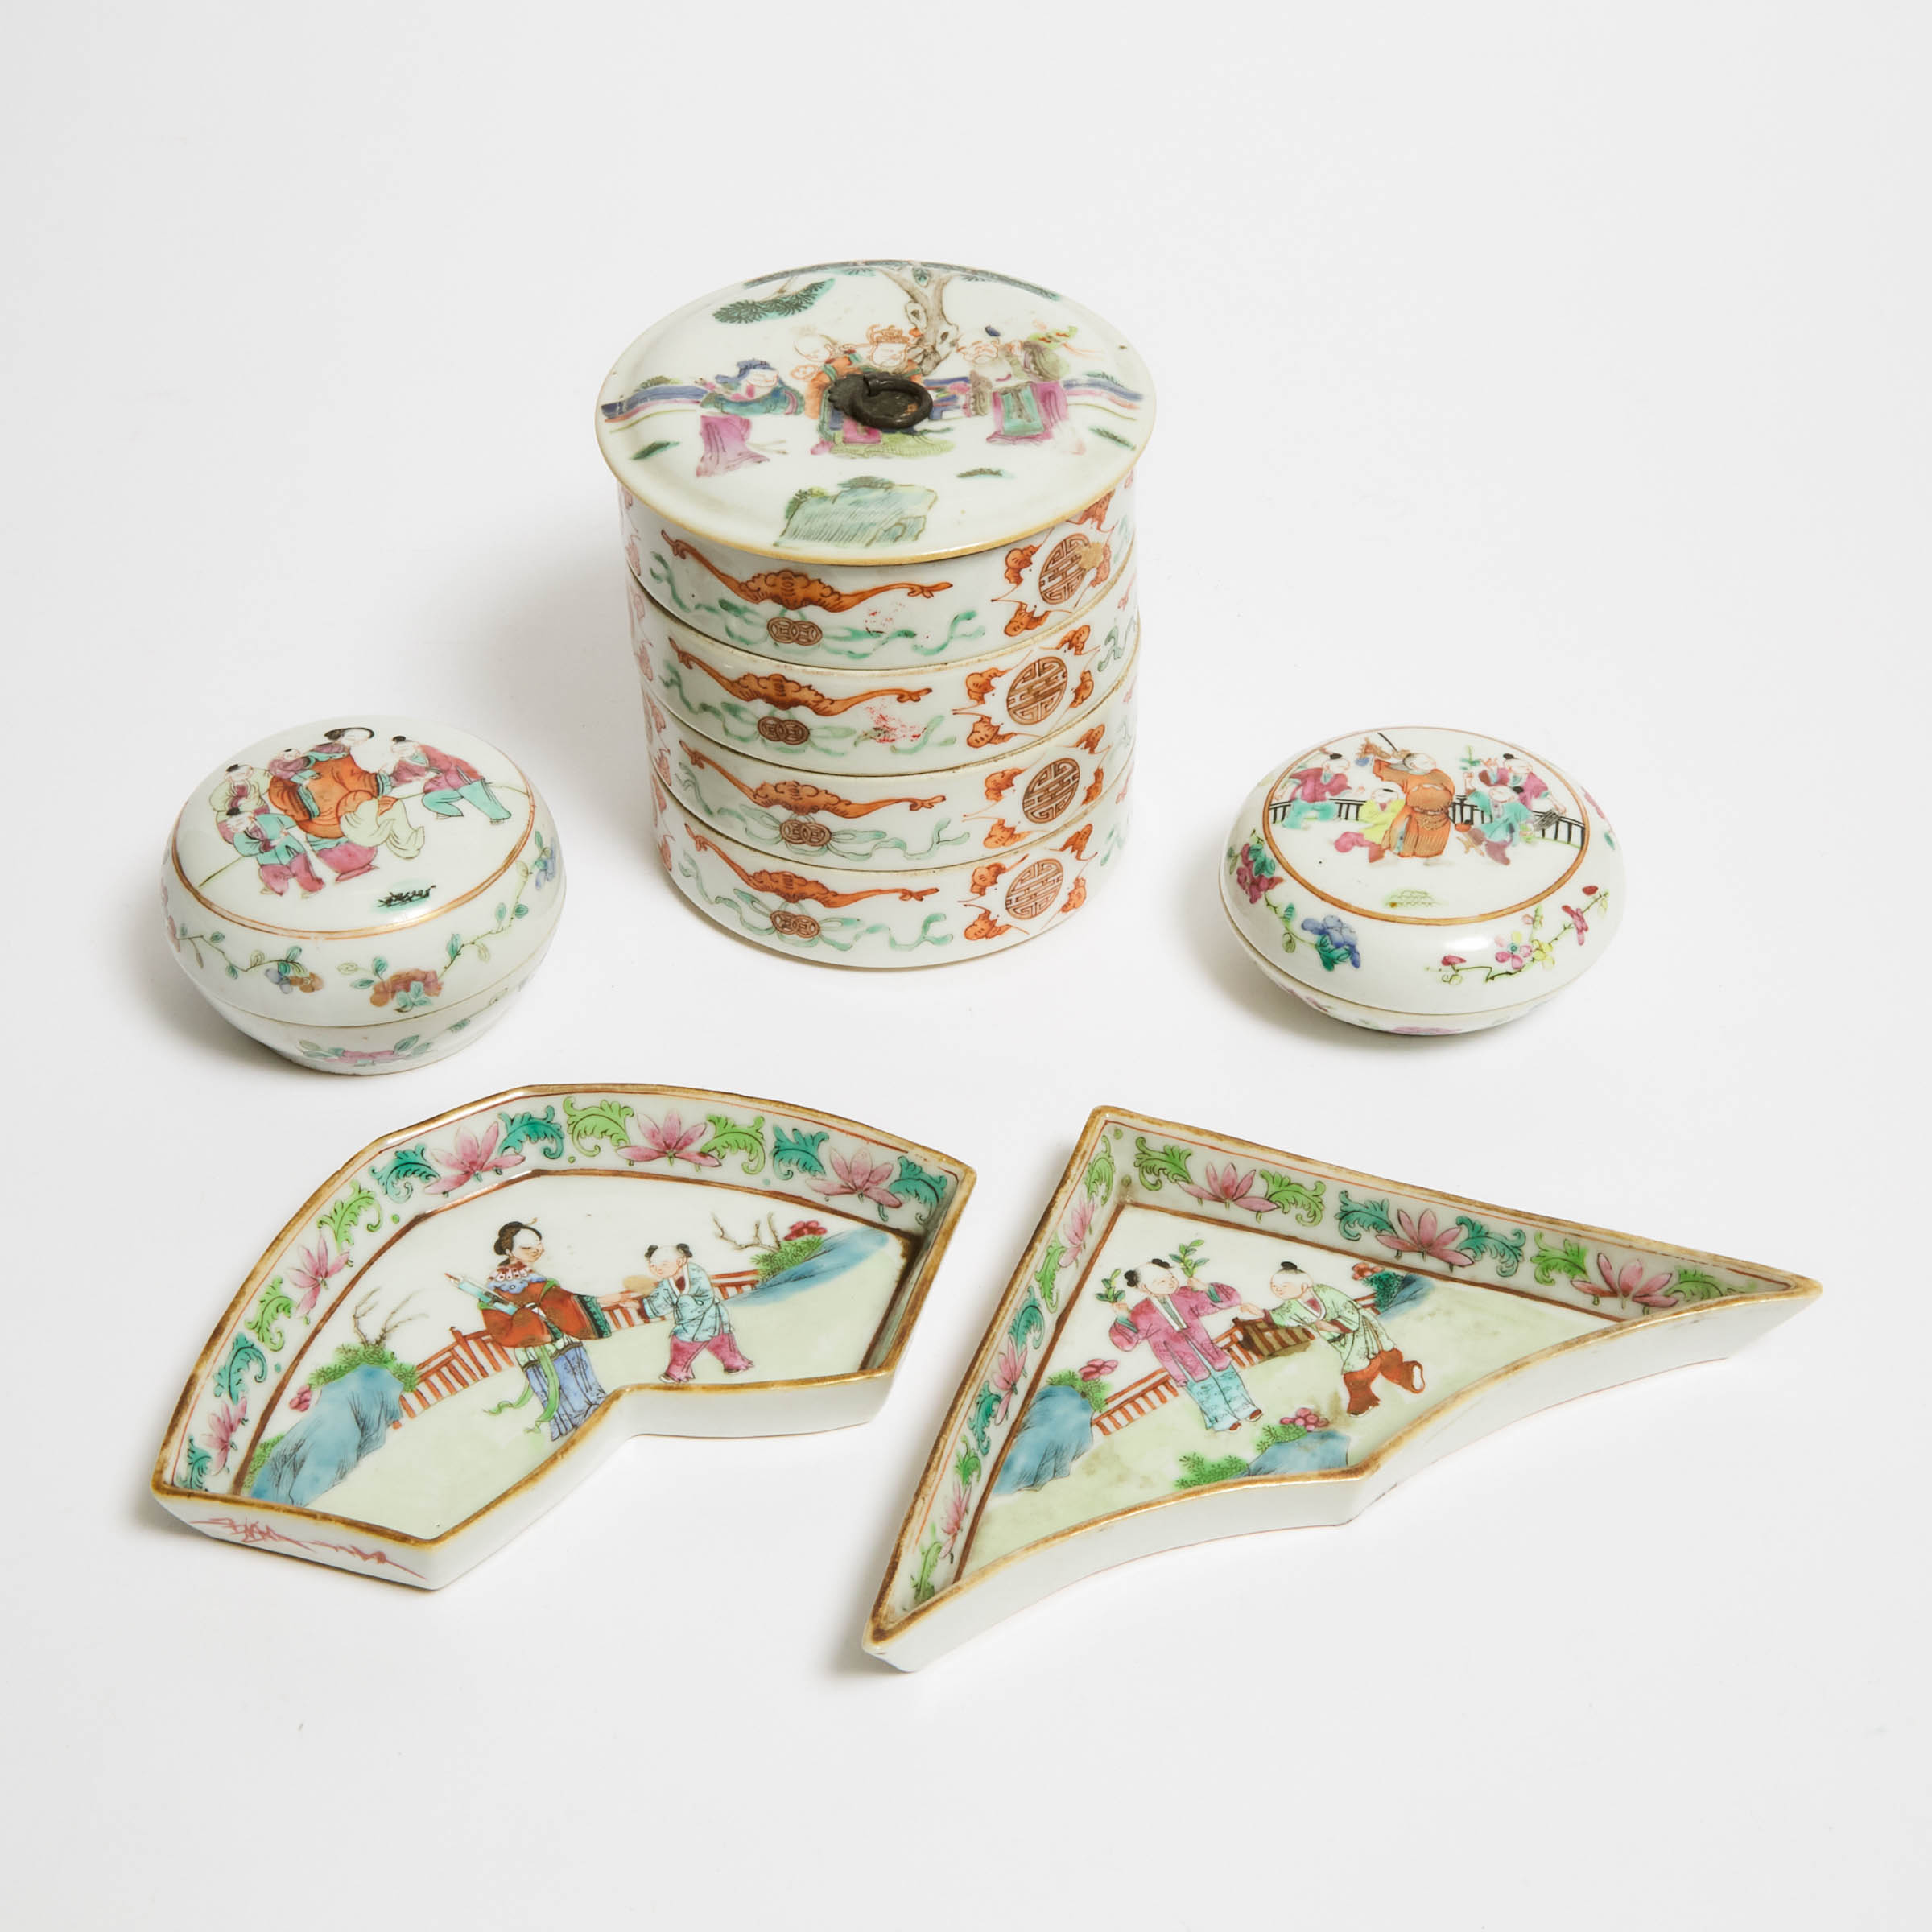 A Group of Five Famille Rose Porcelain Wares, Late Qing Dynasty